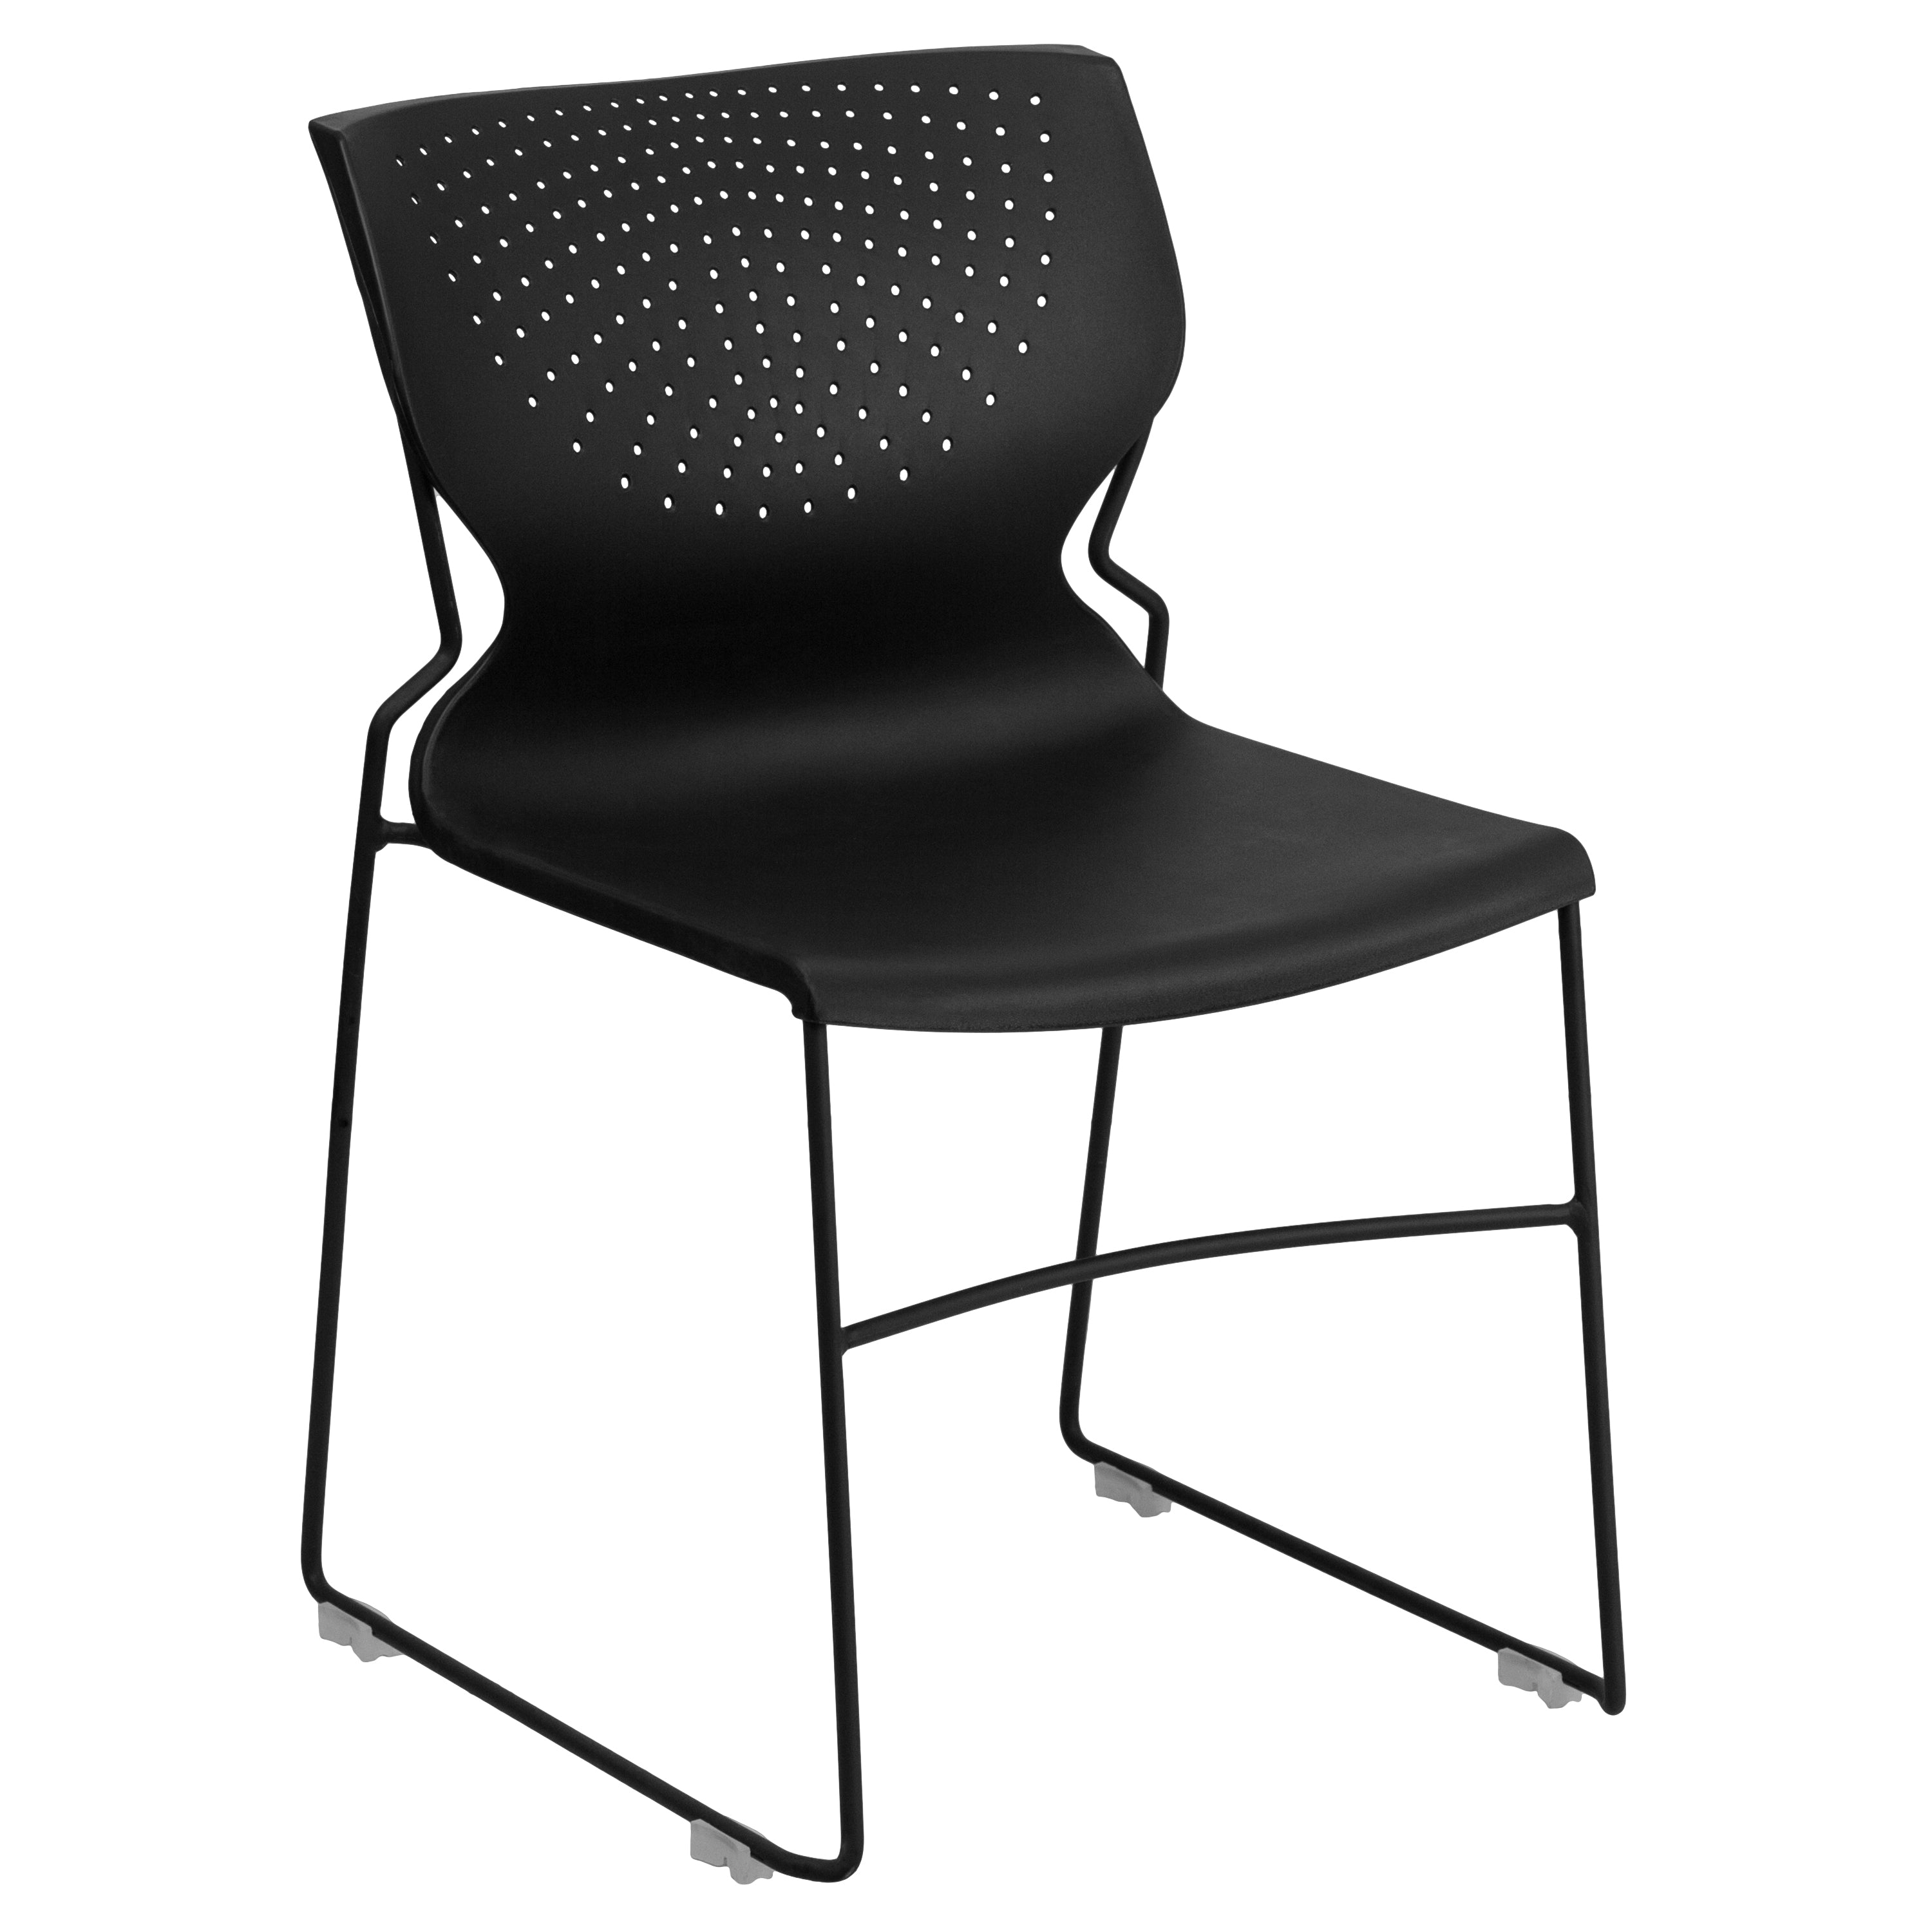 HERCULES Series 661 lb. Capacity Full Back Stack Chair with Powder Coated Frame-Plastic Stack Chair-Flash Furniture-Wall2Wall Furnishings